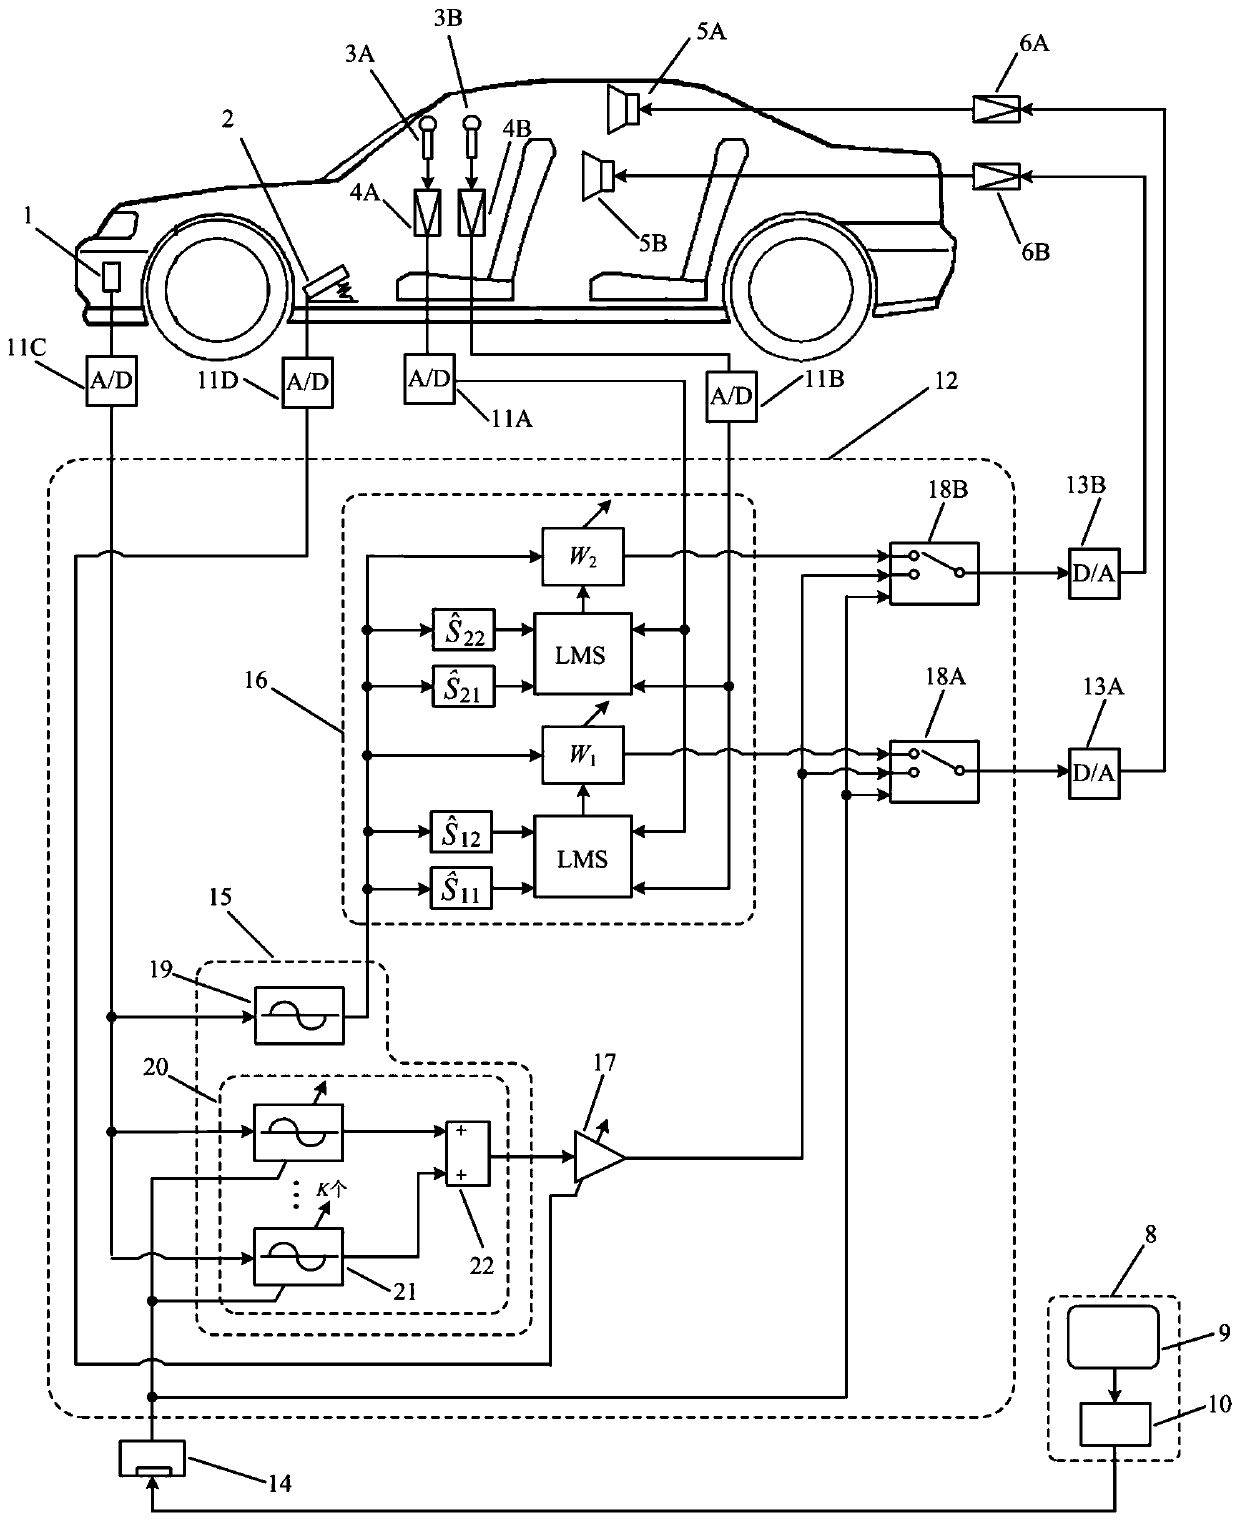 In-vehicle engine multi-sound-effect active control system